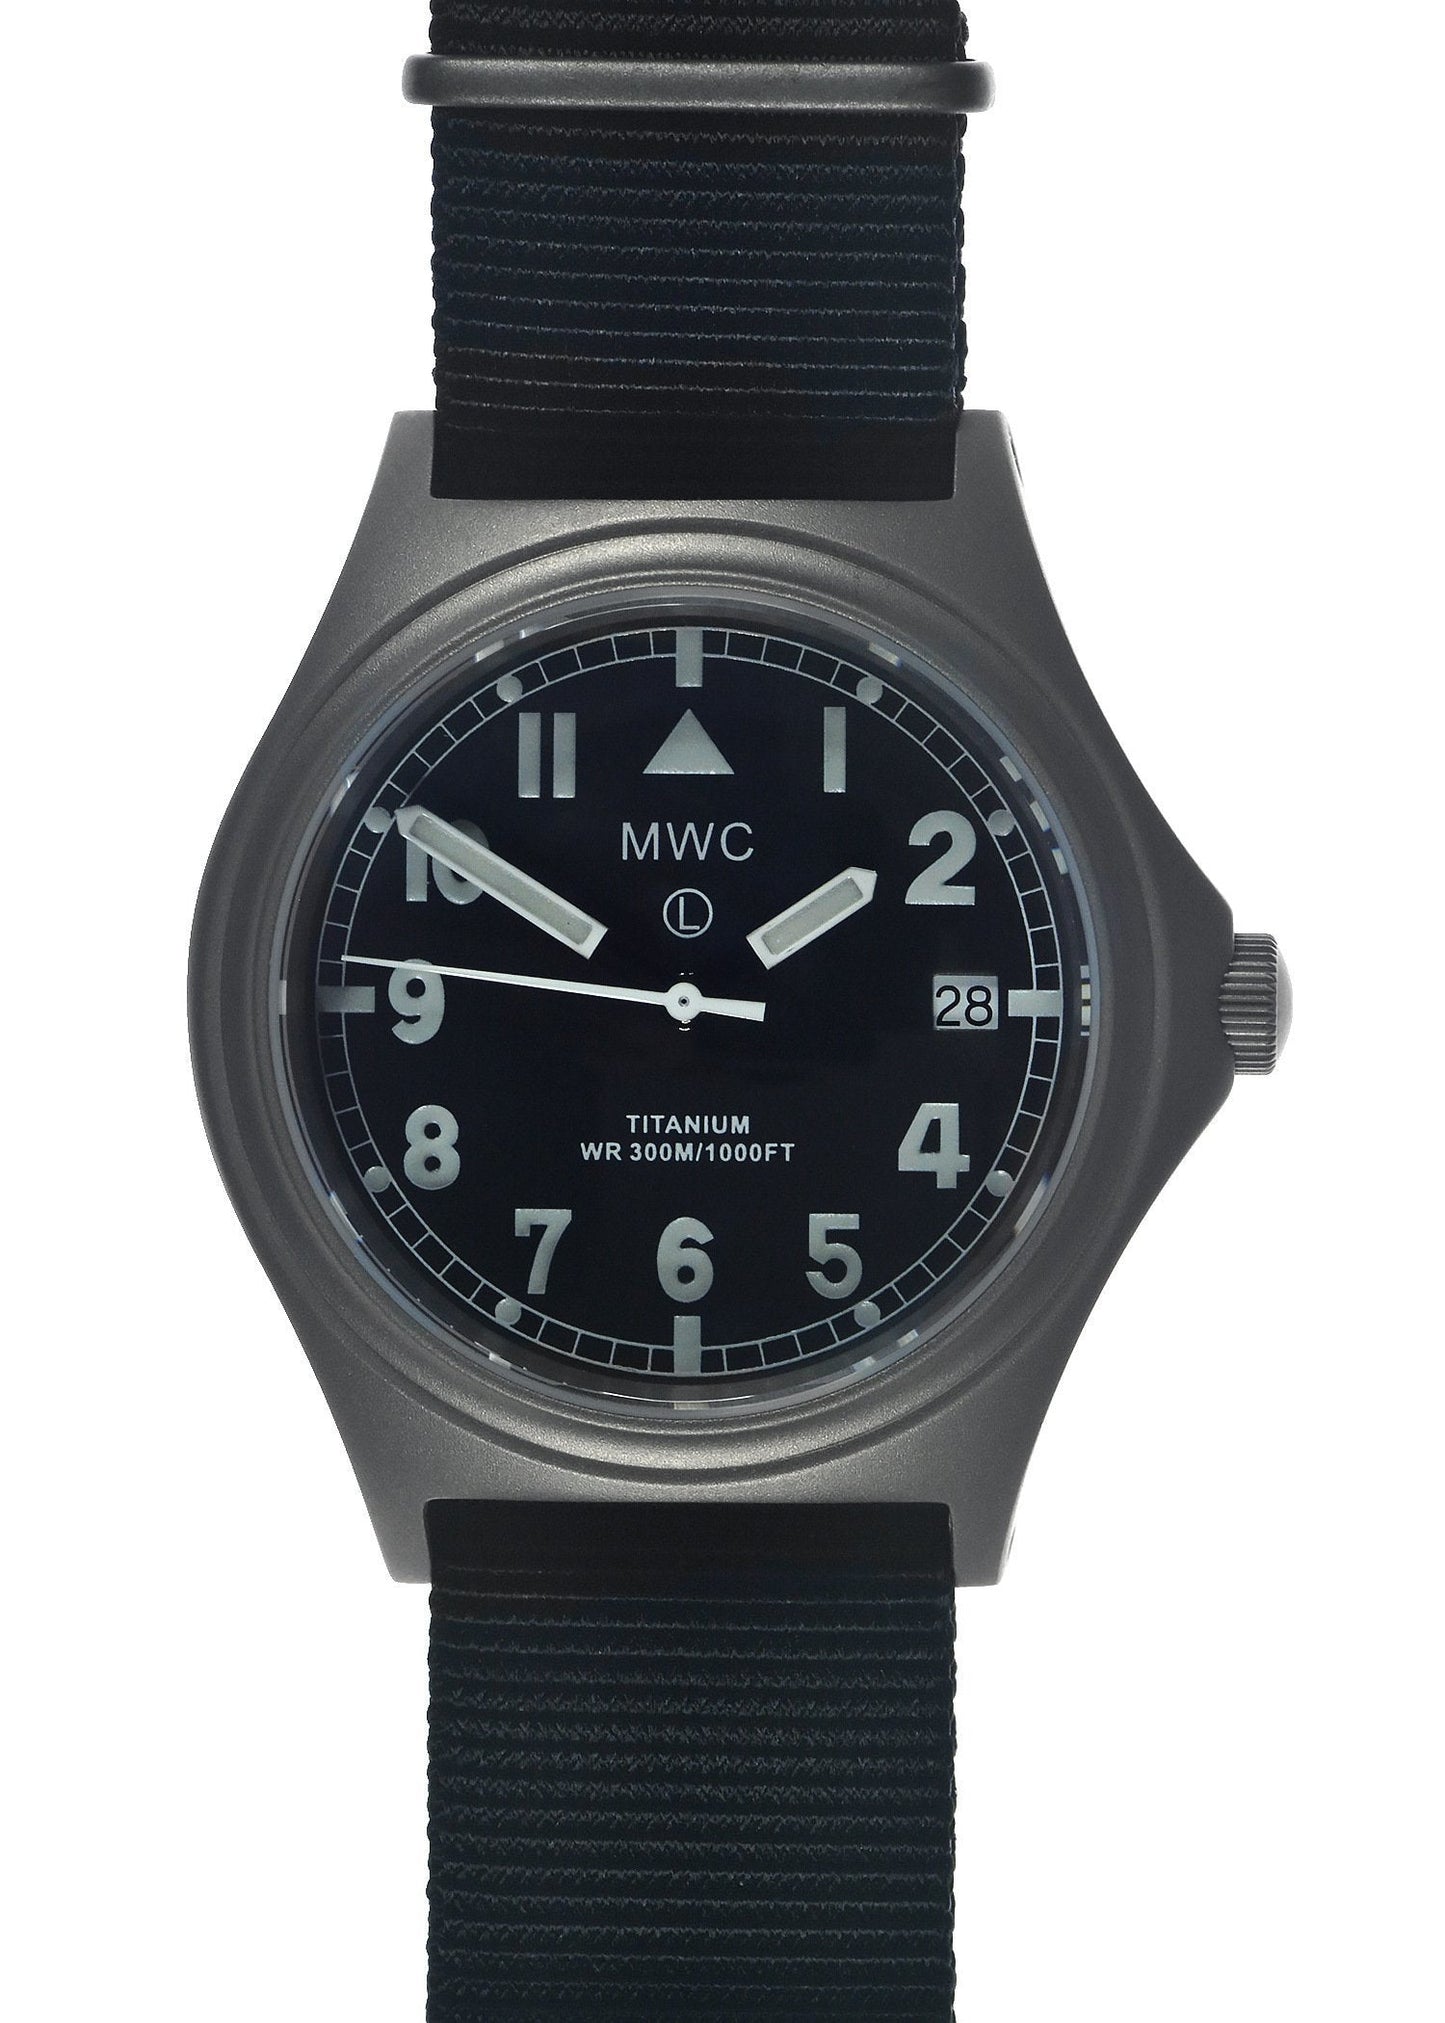 MWC Titanium General Service Watch, 300m Water Resistant, 10 Year Battery Life, Luminova, Sapphire Crystal and 12 Dial Format (Date Version)